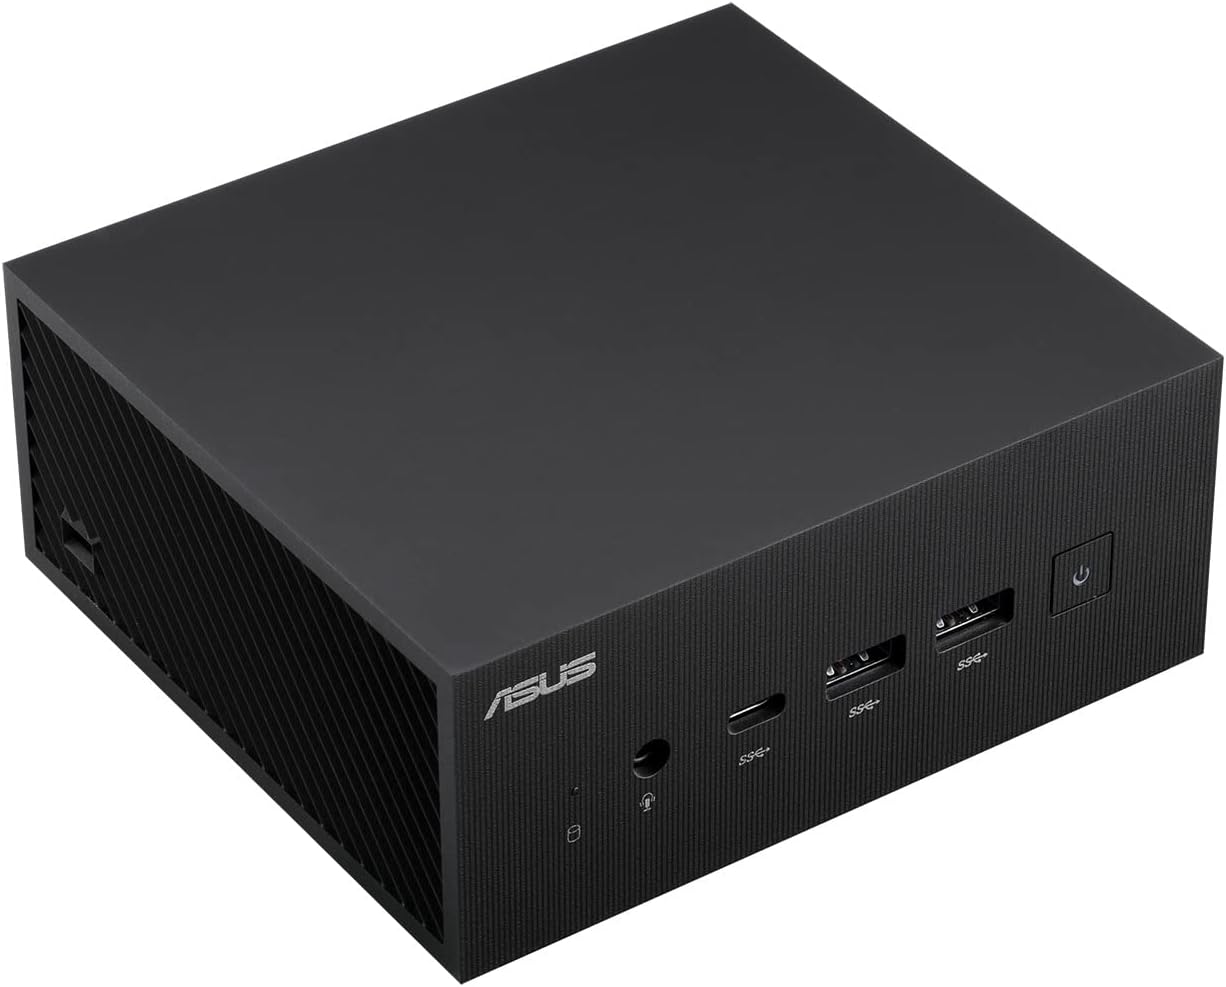 ASUS Ultra-Compact Mini PC with AMD Ryzen 5000H Series Processors and AMD Radeon Graphics, Supports Quad-4K displays and 8K Resolution, 2X PCIe Gen3 x4 M.2 NVMe SSD, 2.5 Gb LAN, WiFi 6E